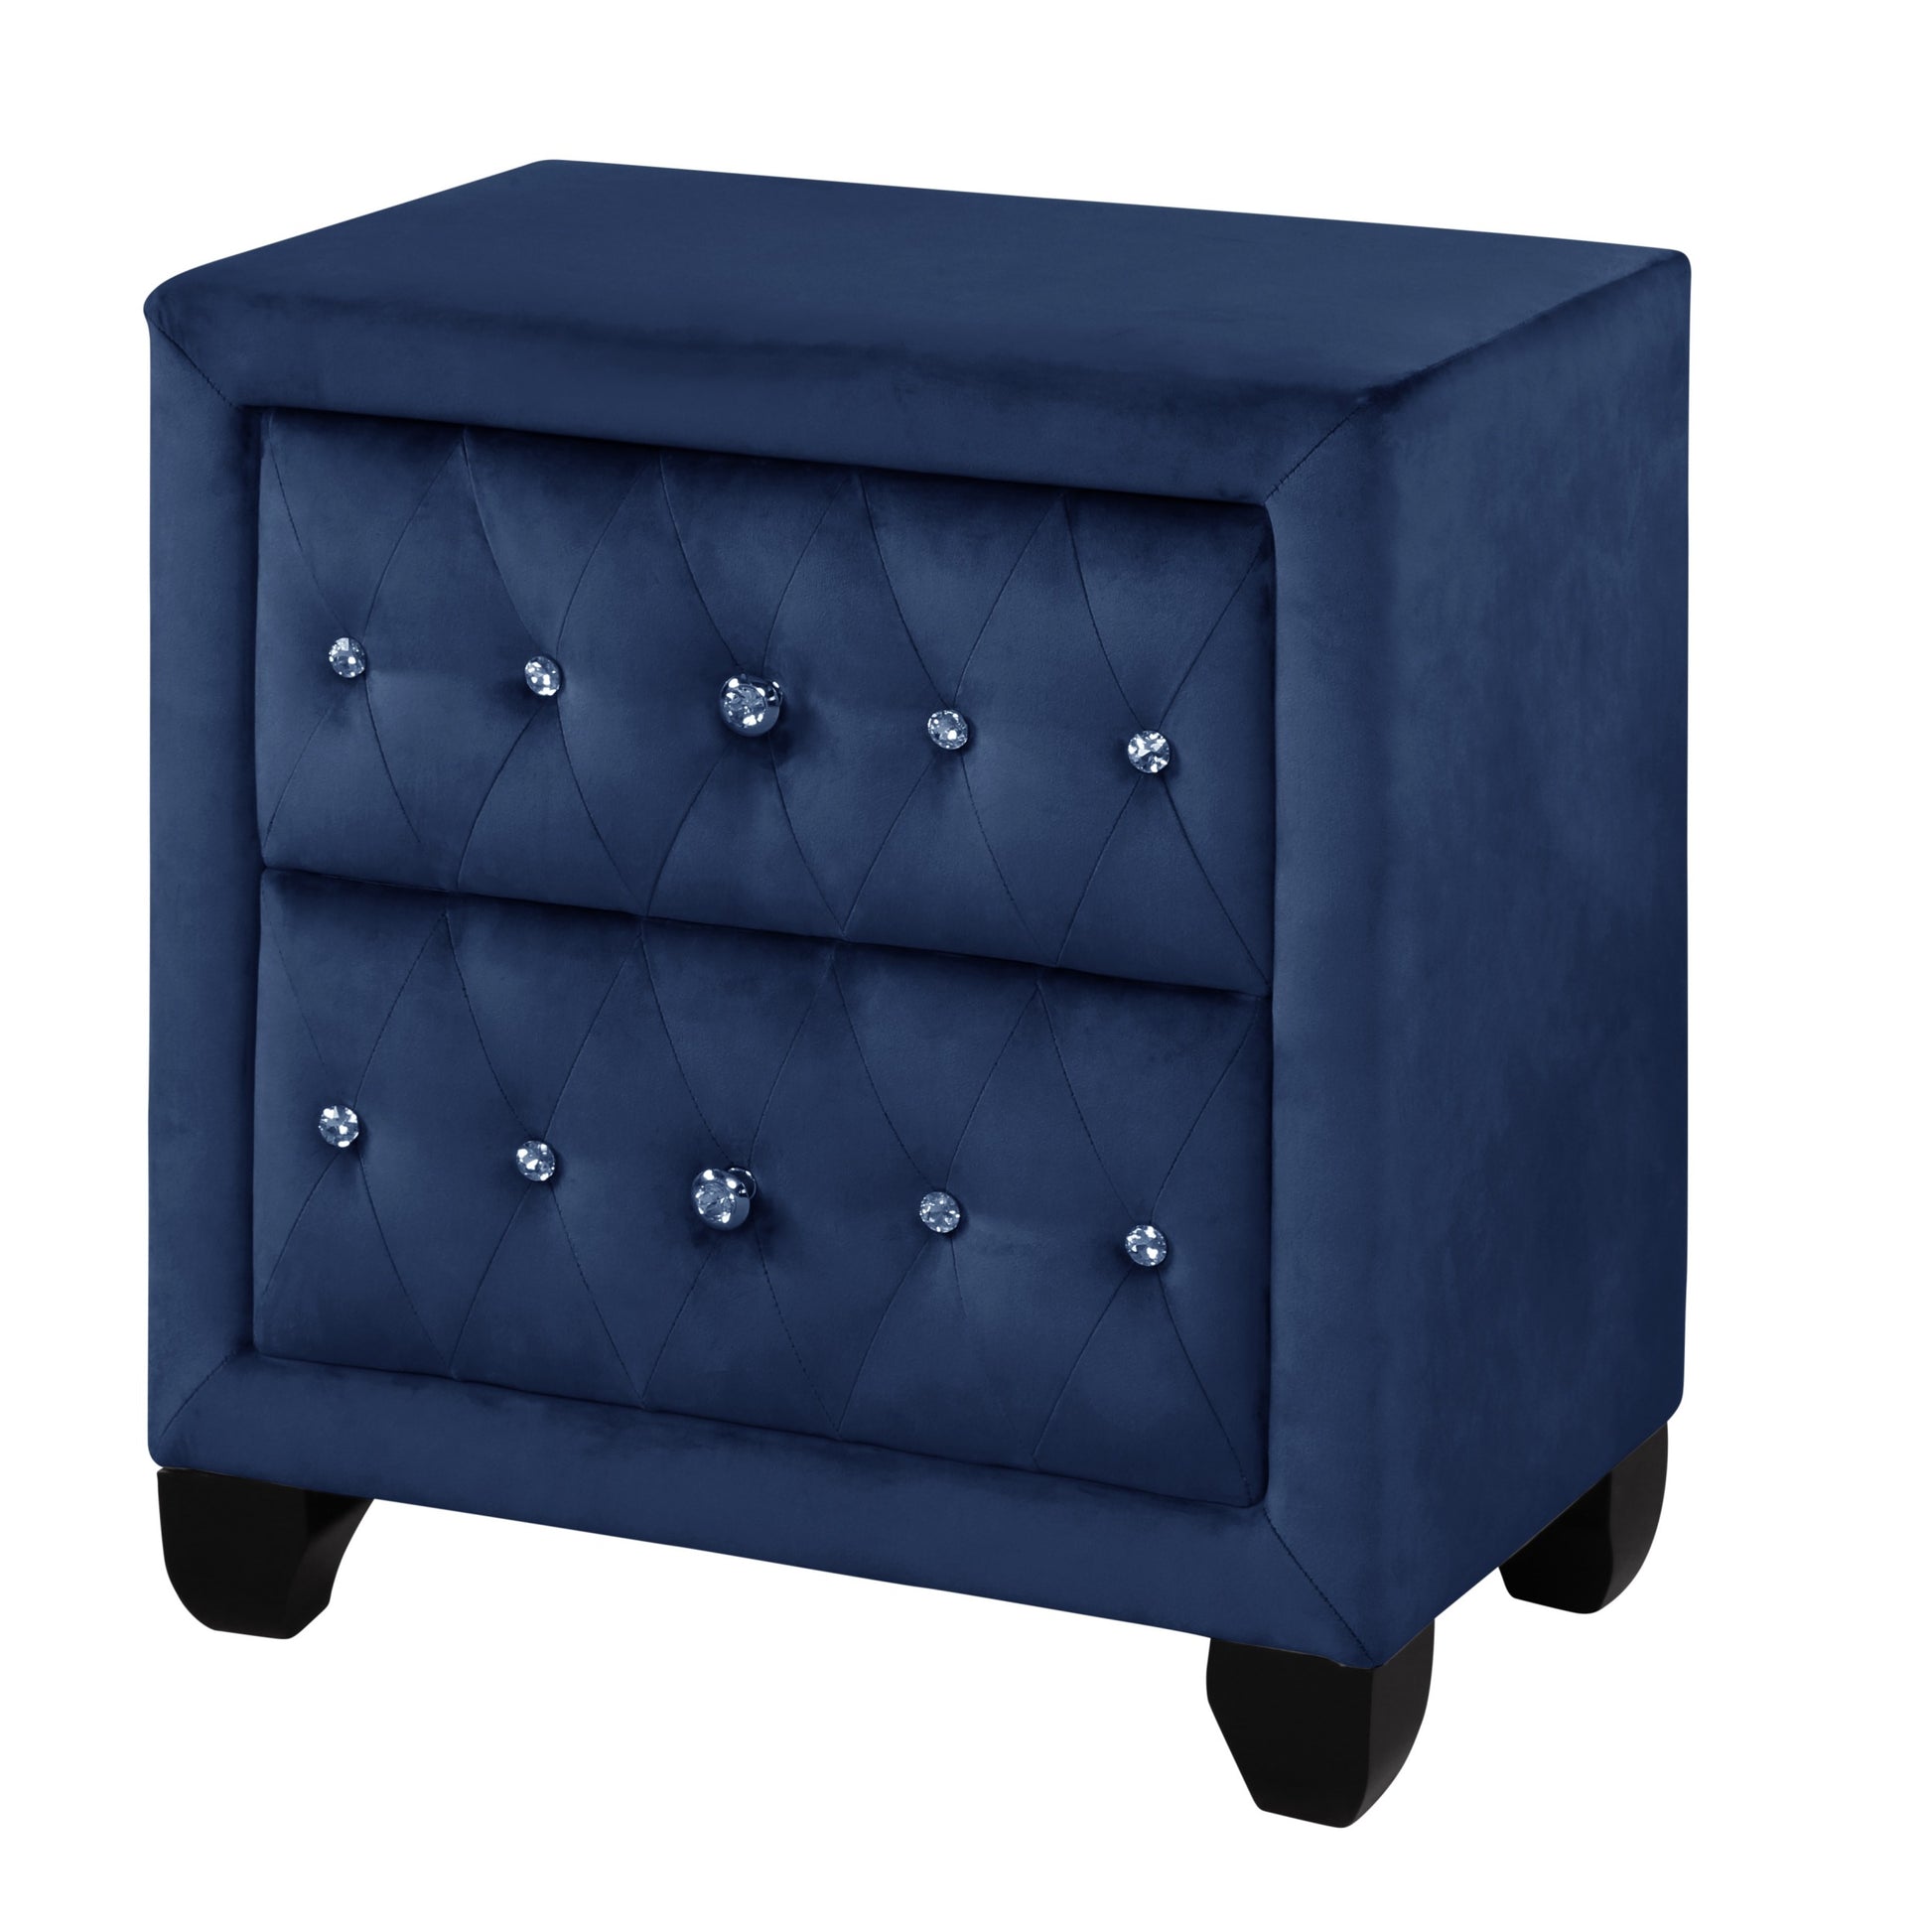 Sophia Modern Style Nightstand made with wood in Blue blue-2 drawers-contemporary-modern-wood